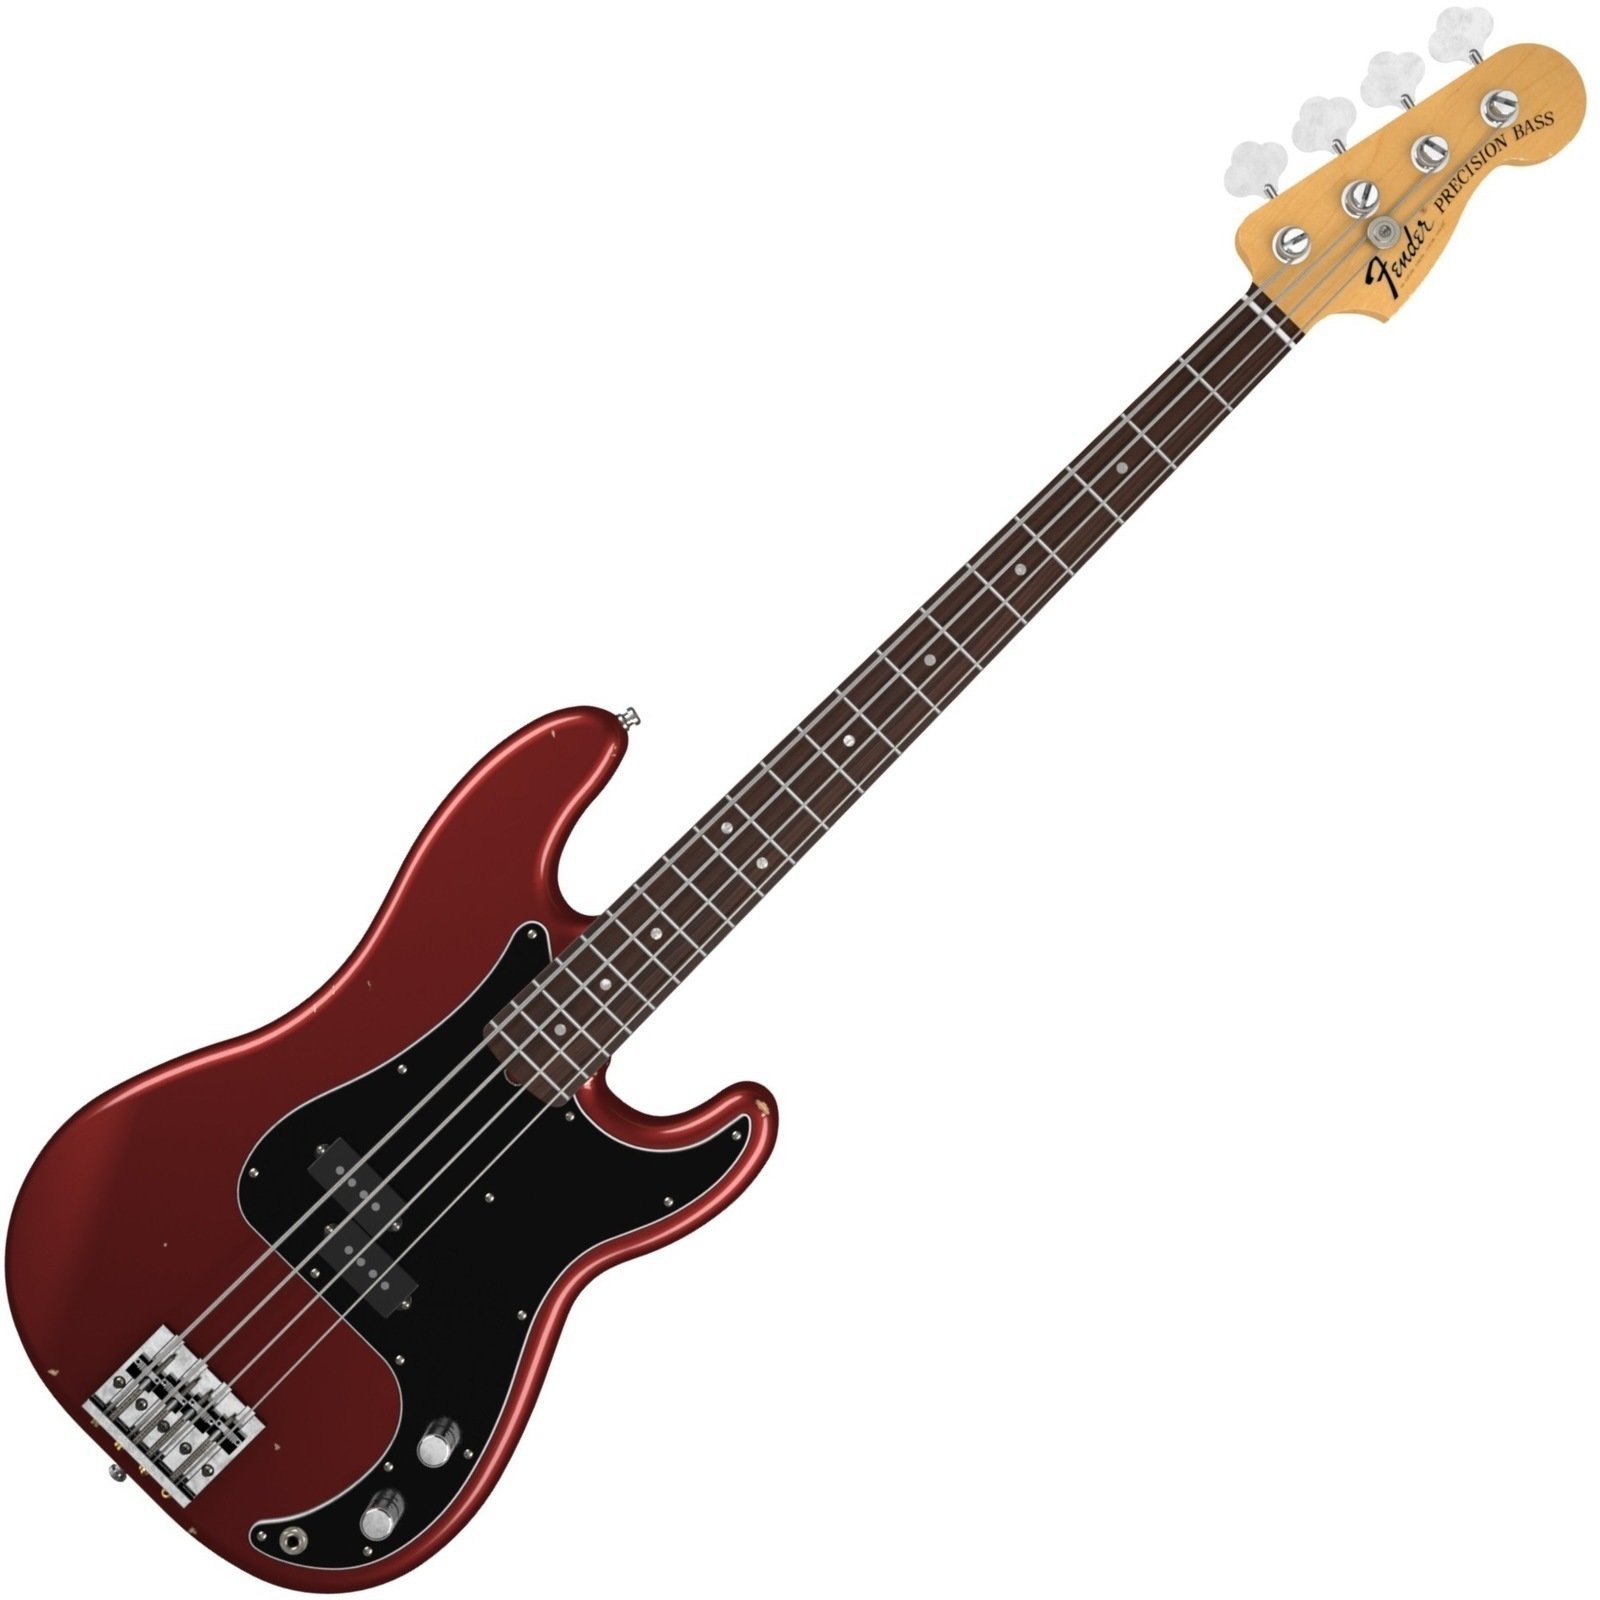 E-Bass Fender Nate Mendel P Bass RW Candy Apple Red